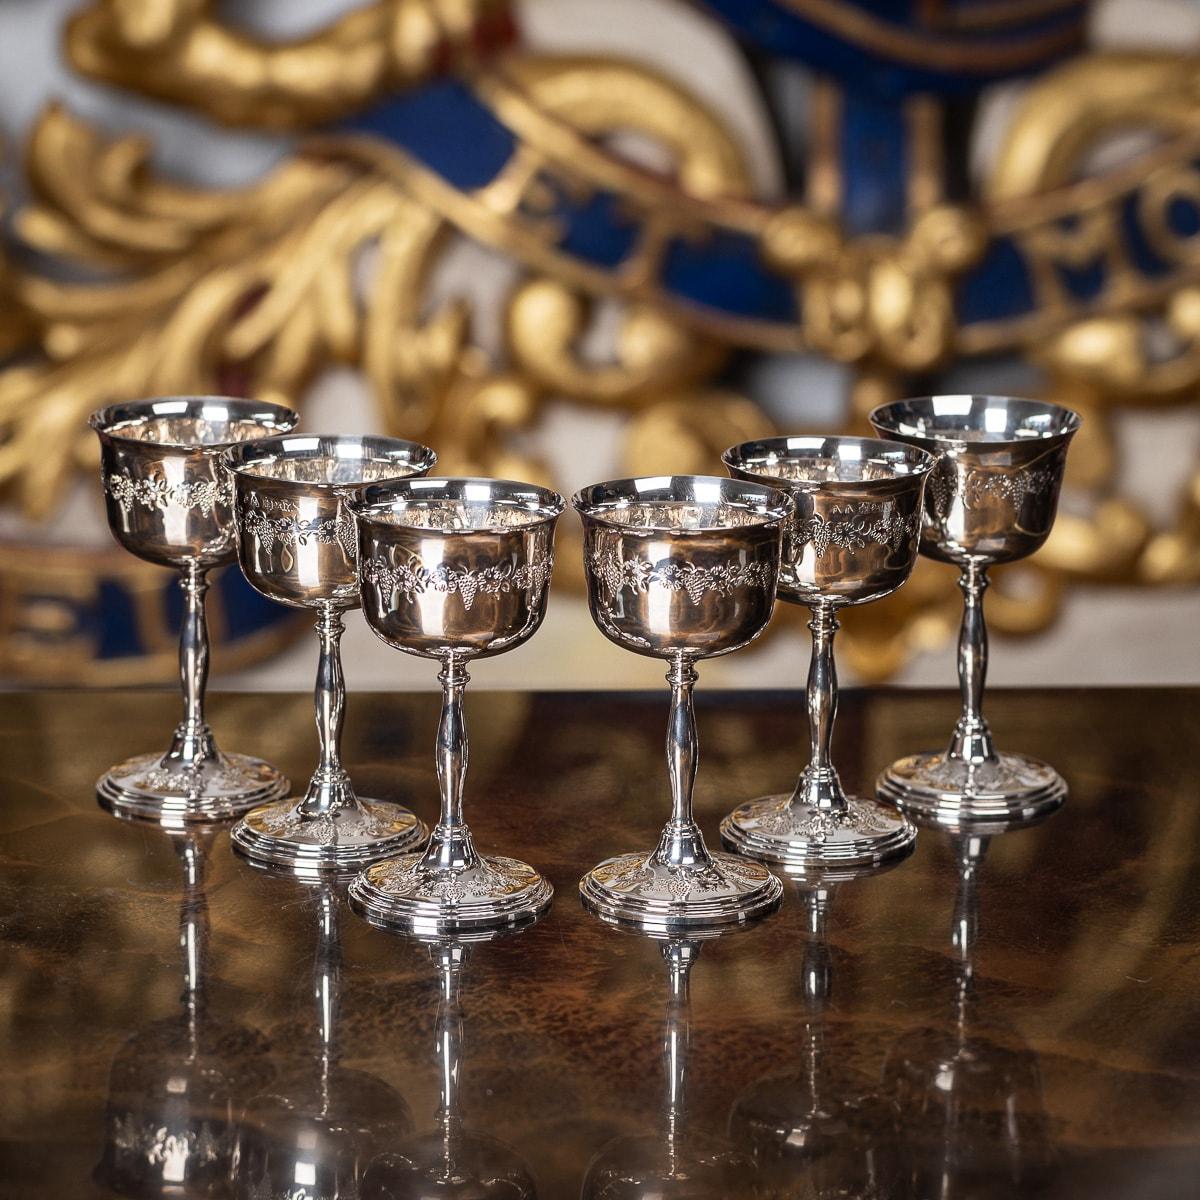 A superb set of six 20th Century English Solid Silver wine goblets. Created by Cavalier in the 1970's, this set of goblets feature a smooth flared drinking rim, leaves & grape vines are engraved in a decorative design around the edge of the goblet